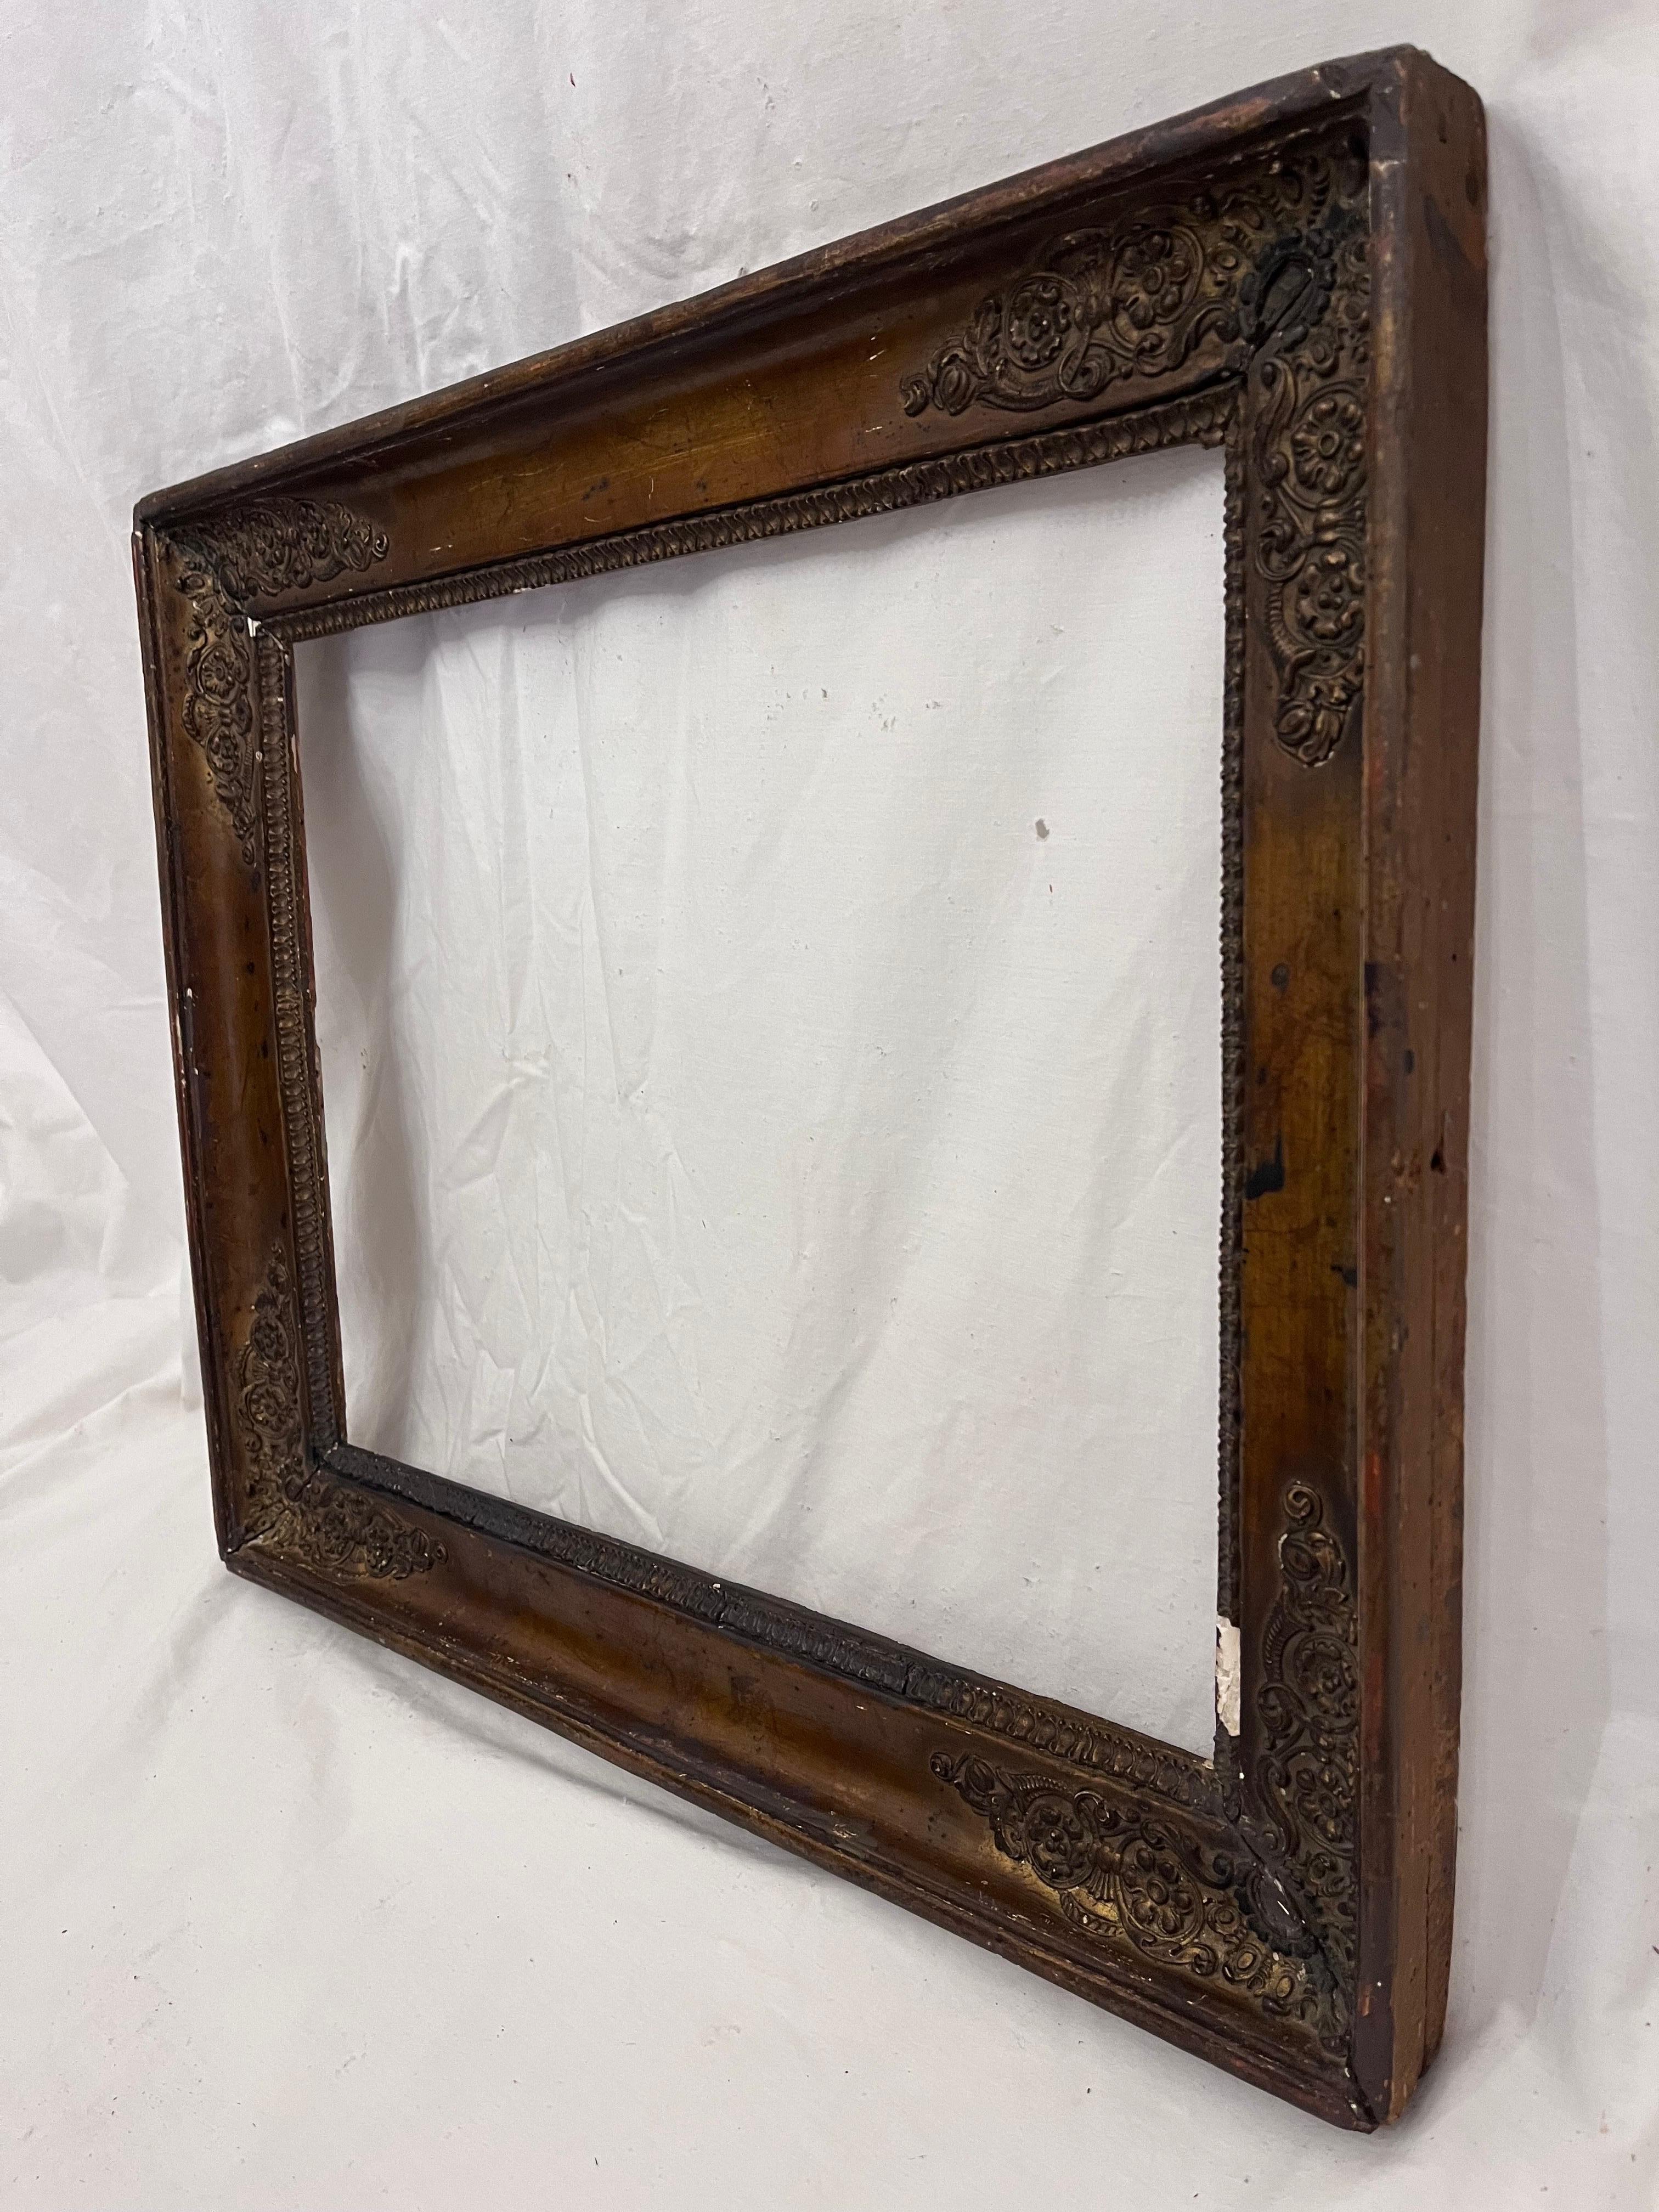 A beautiful and antique late 19th century circa 1880's French Neo-Classical style picture frame, mostly associated with drawings or works on paper. The rabbet size (size that holds the art) is 15.25